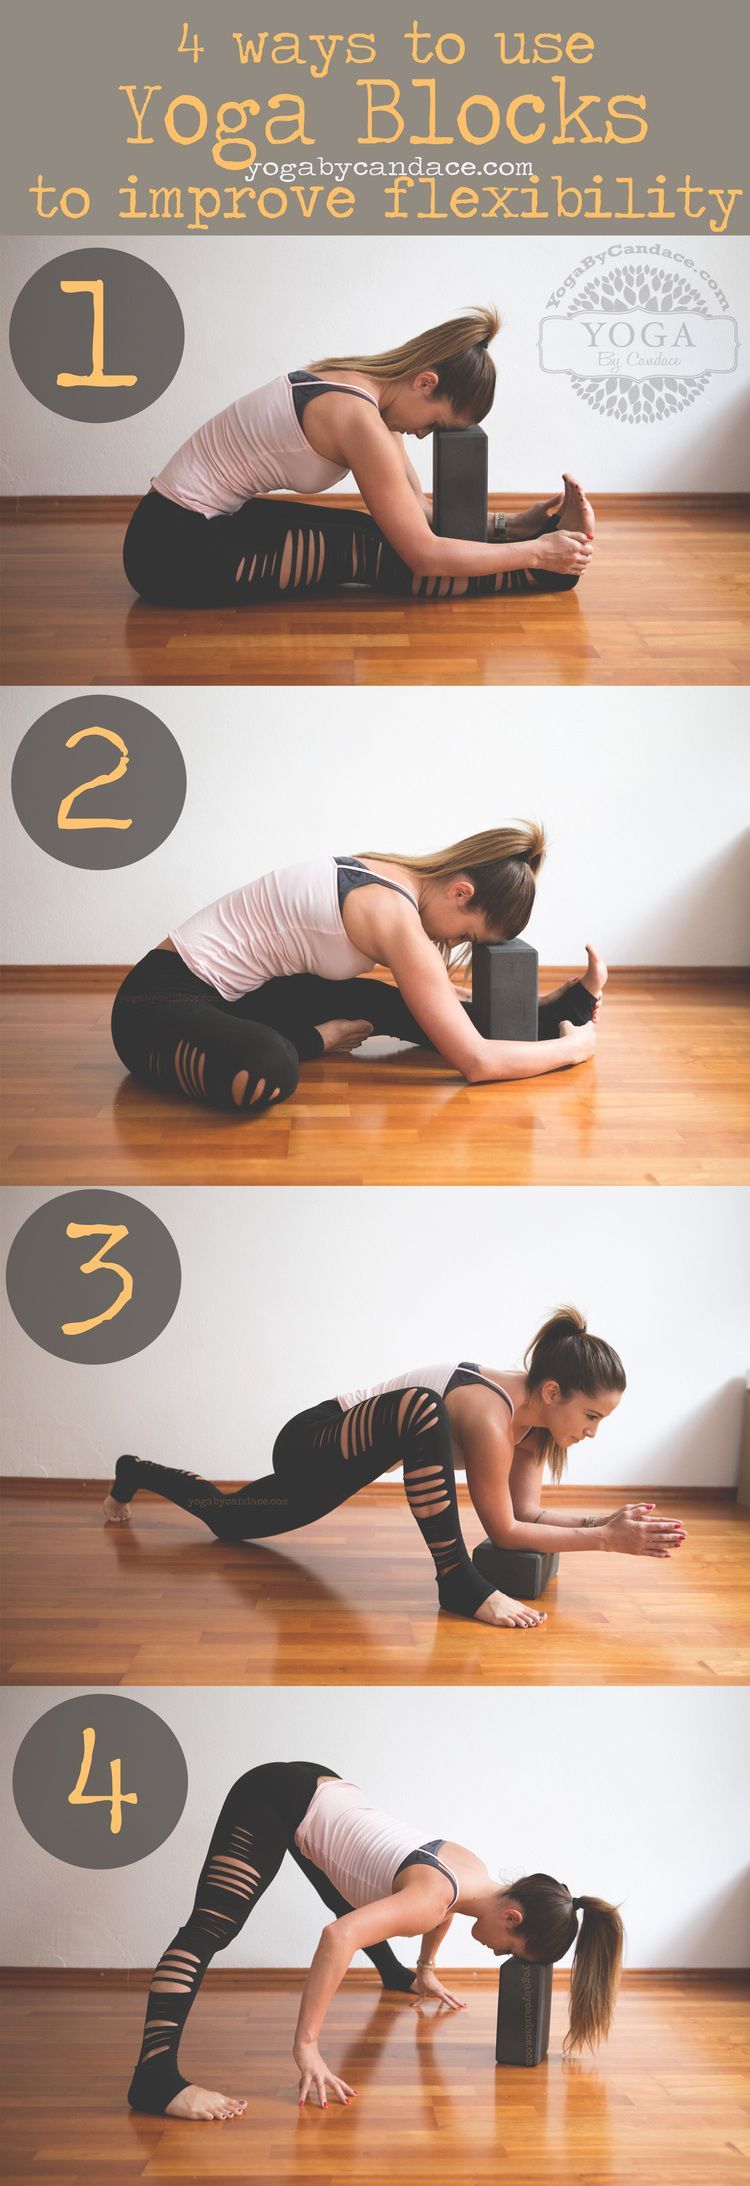 Pin now, practice later! 4 ways to use yoga blocks to improve your flexibility Wea